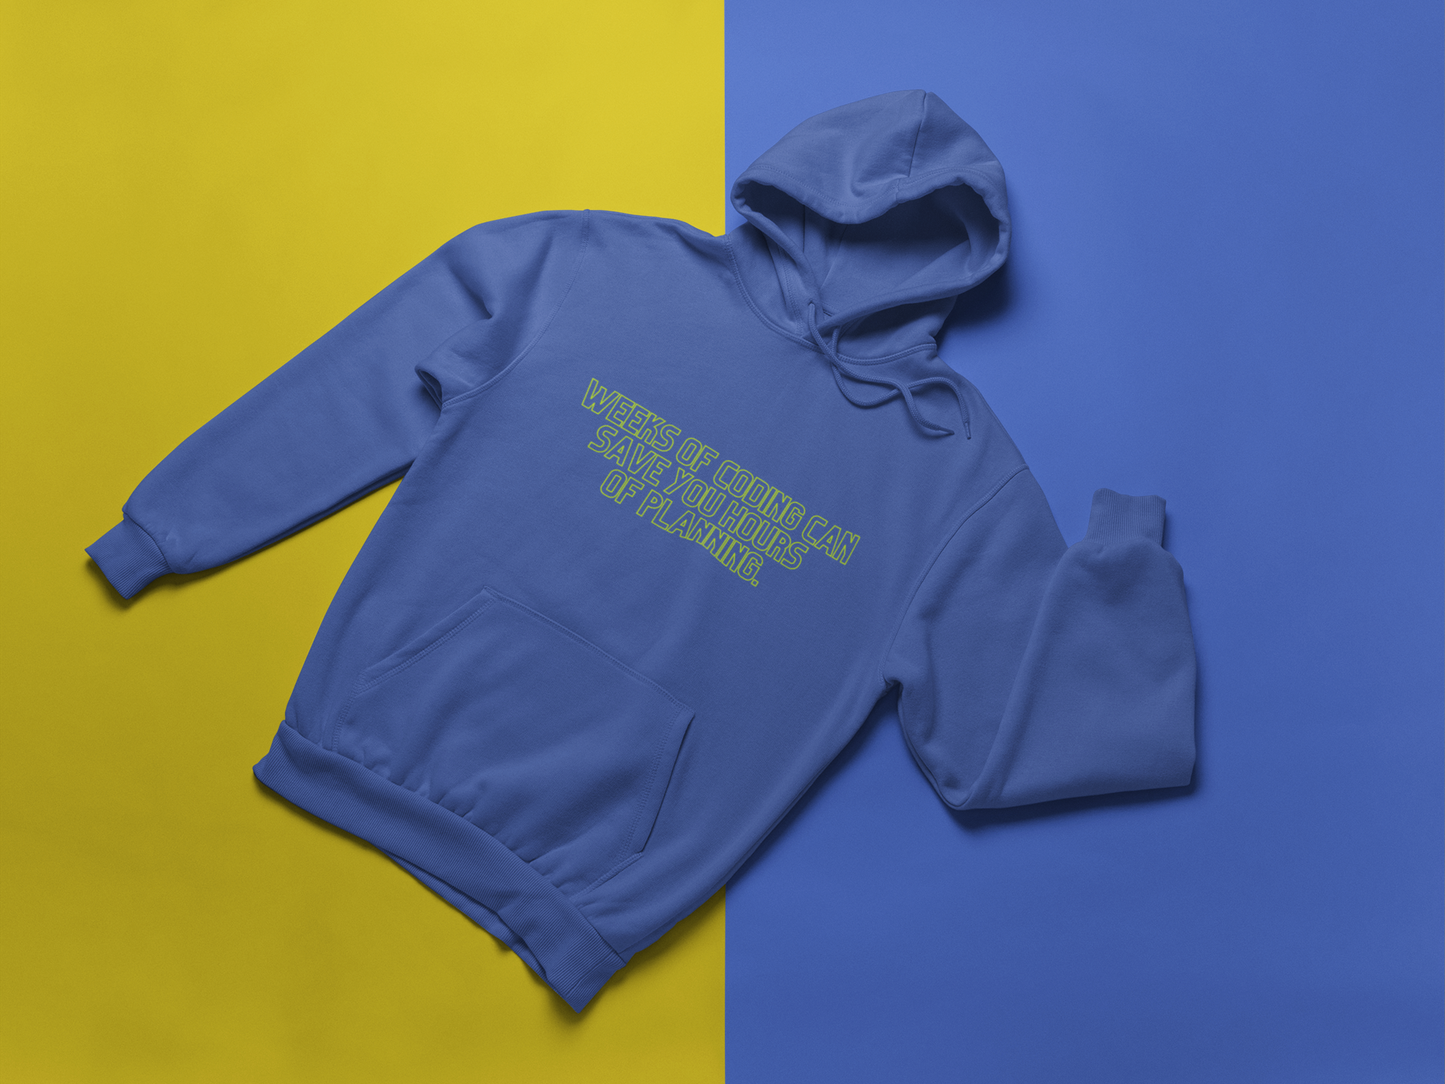 Weeks of coding can save you hours of planning - Heavy Blend™ Hoodie